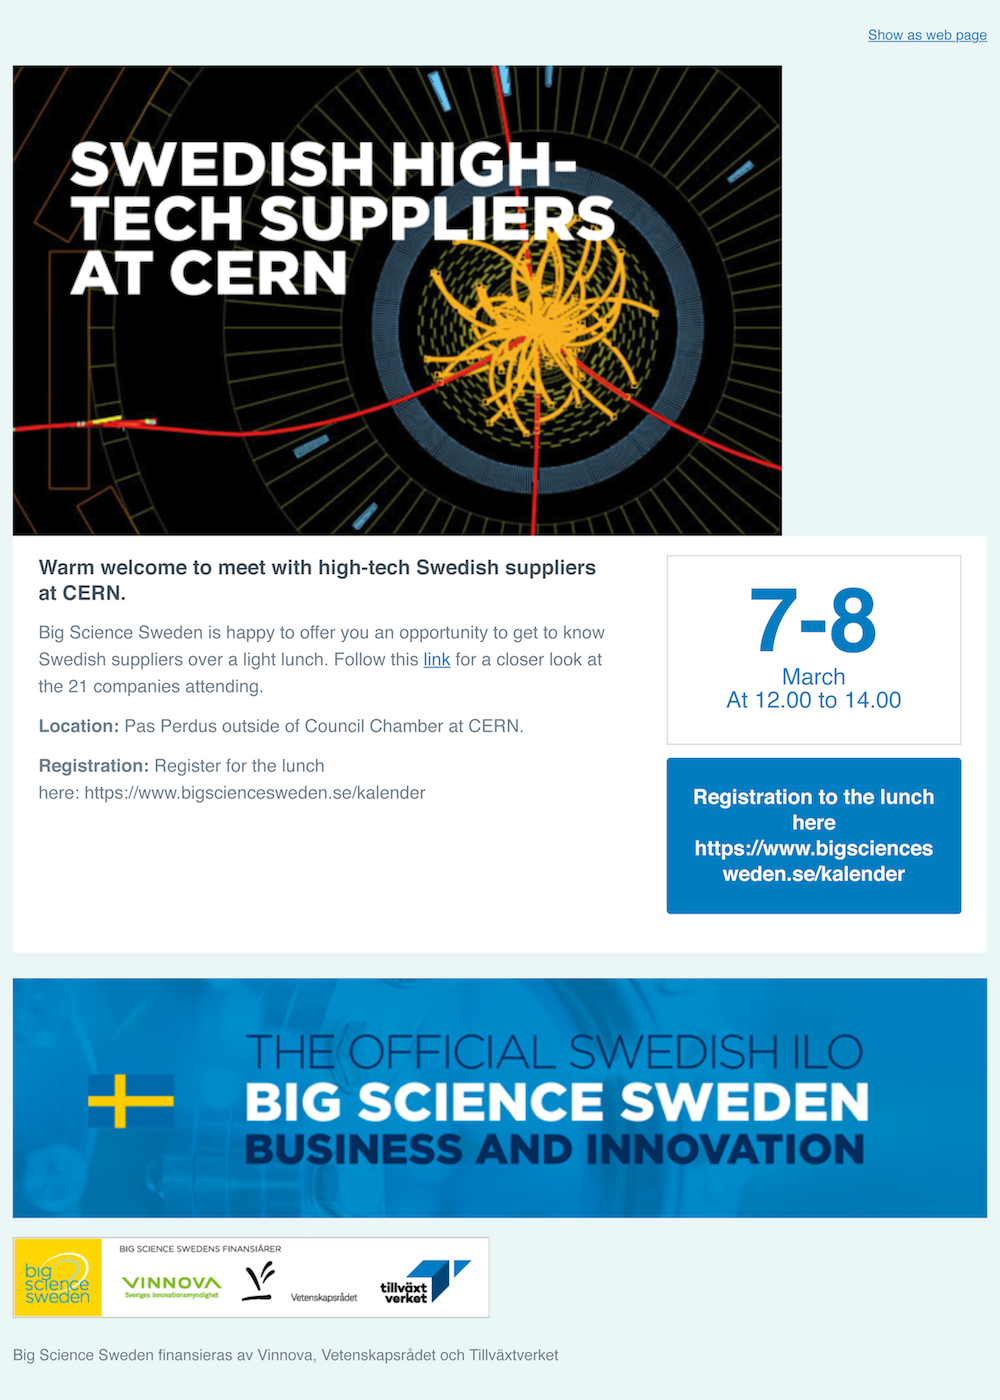 Meet with high-tech Swedish suppliers at CERN on 7 and 8 March